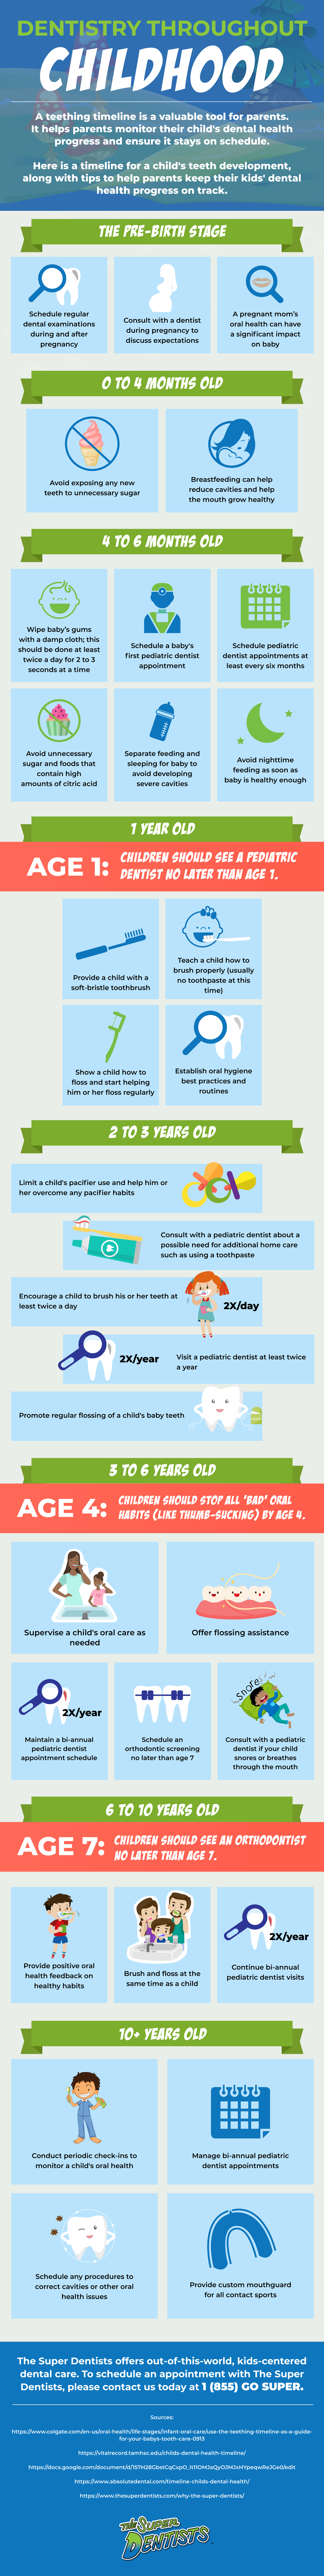 Dentistry Throughout Childhood | The Super Dentists